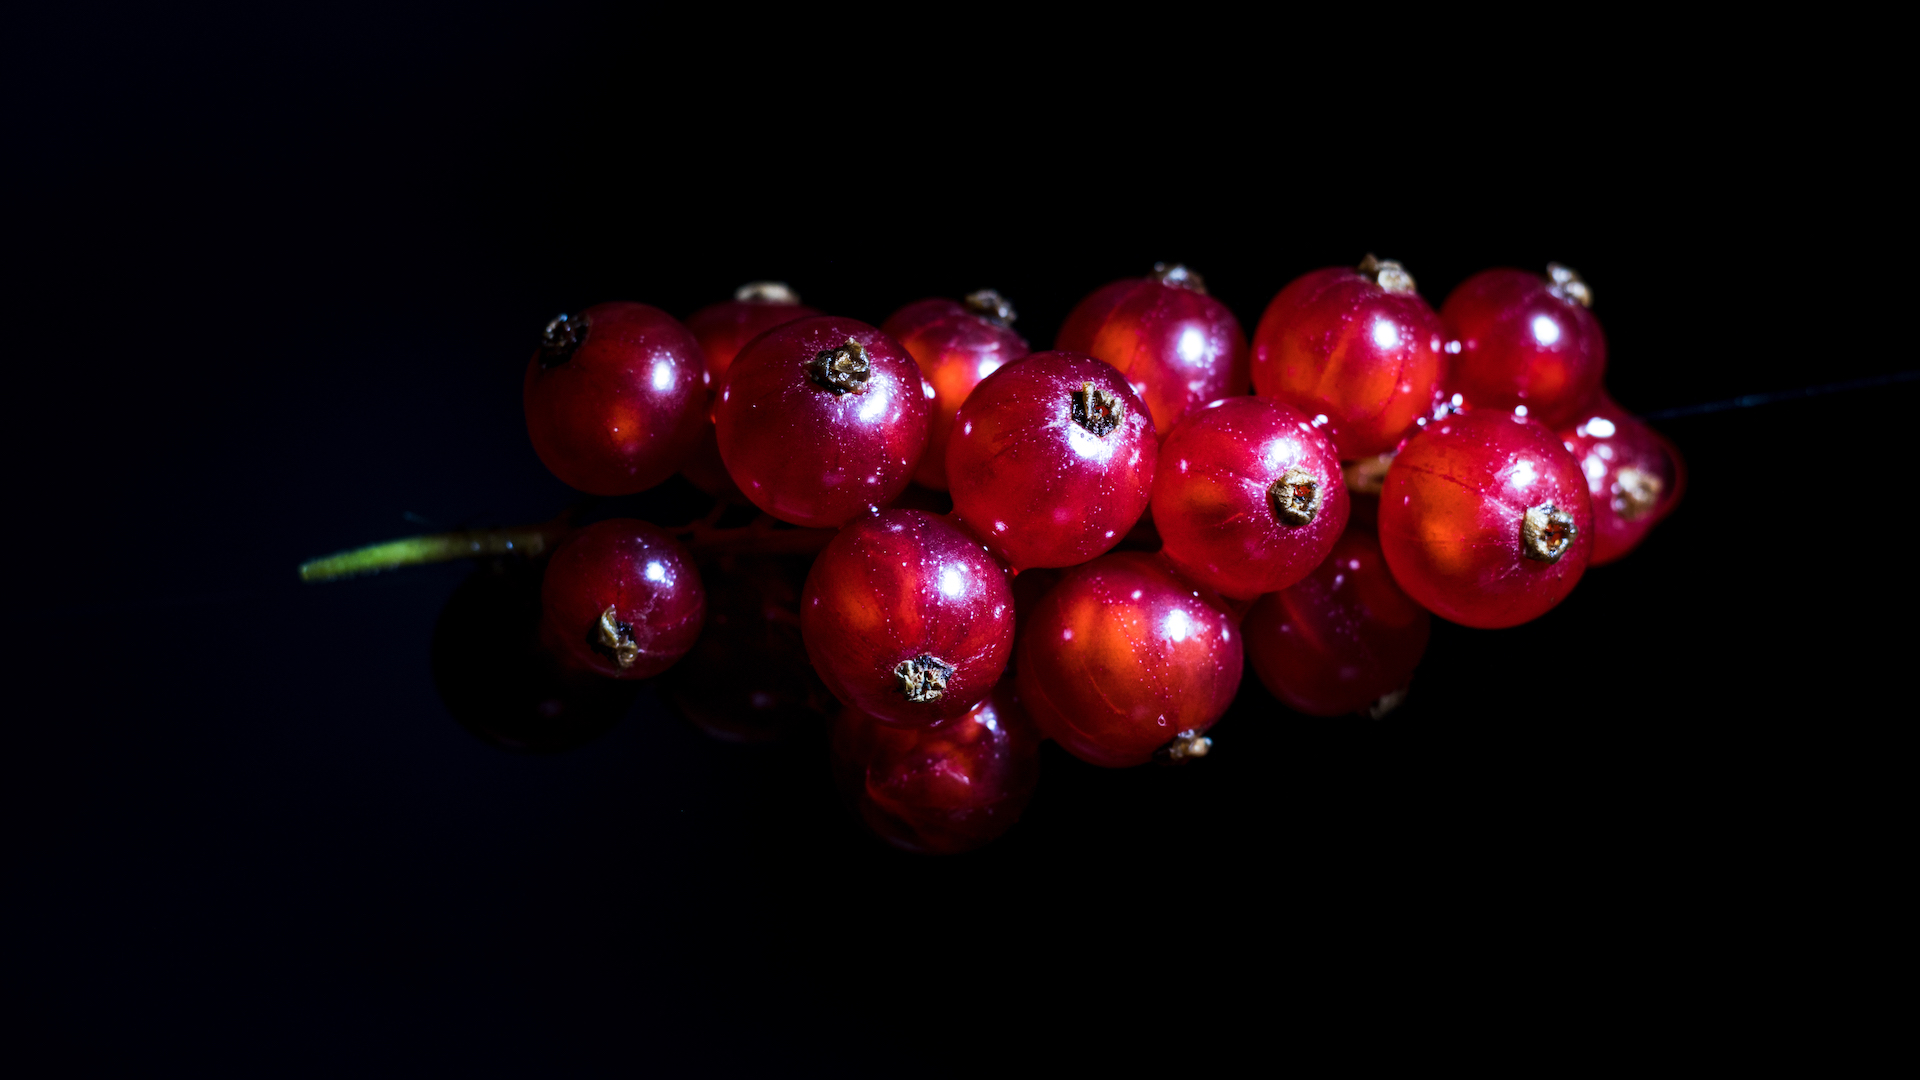  red currant 